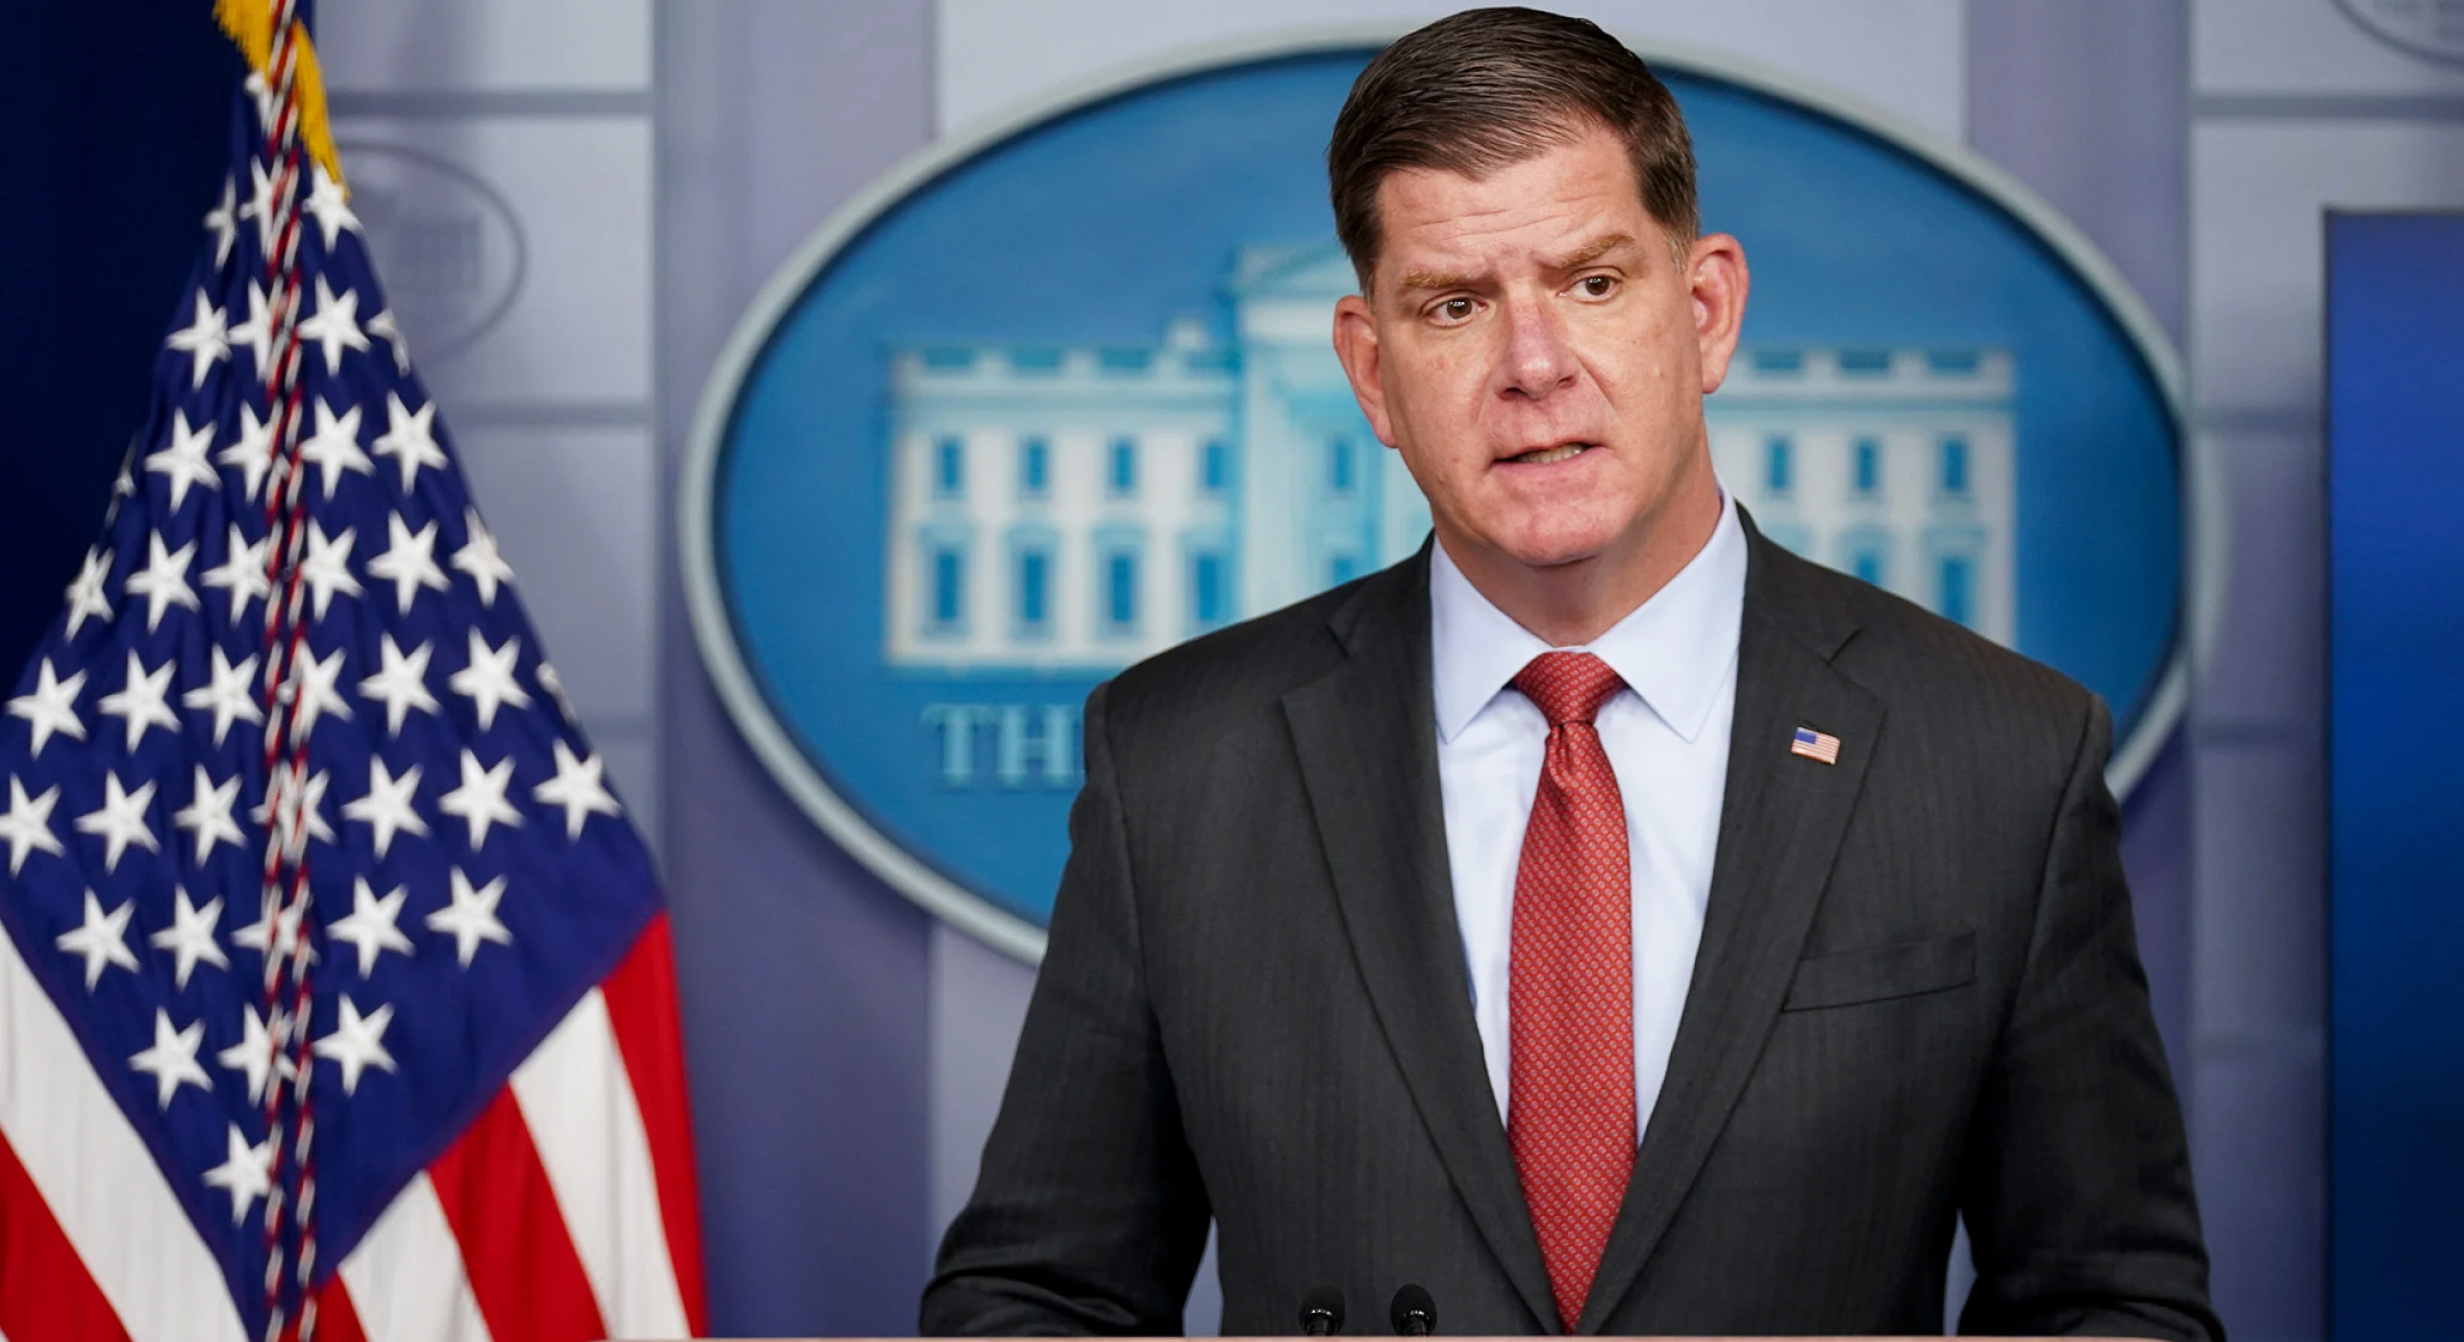 Image of department of labor secretary Marty Walsh.